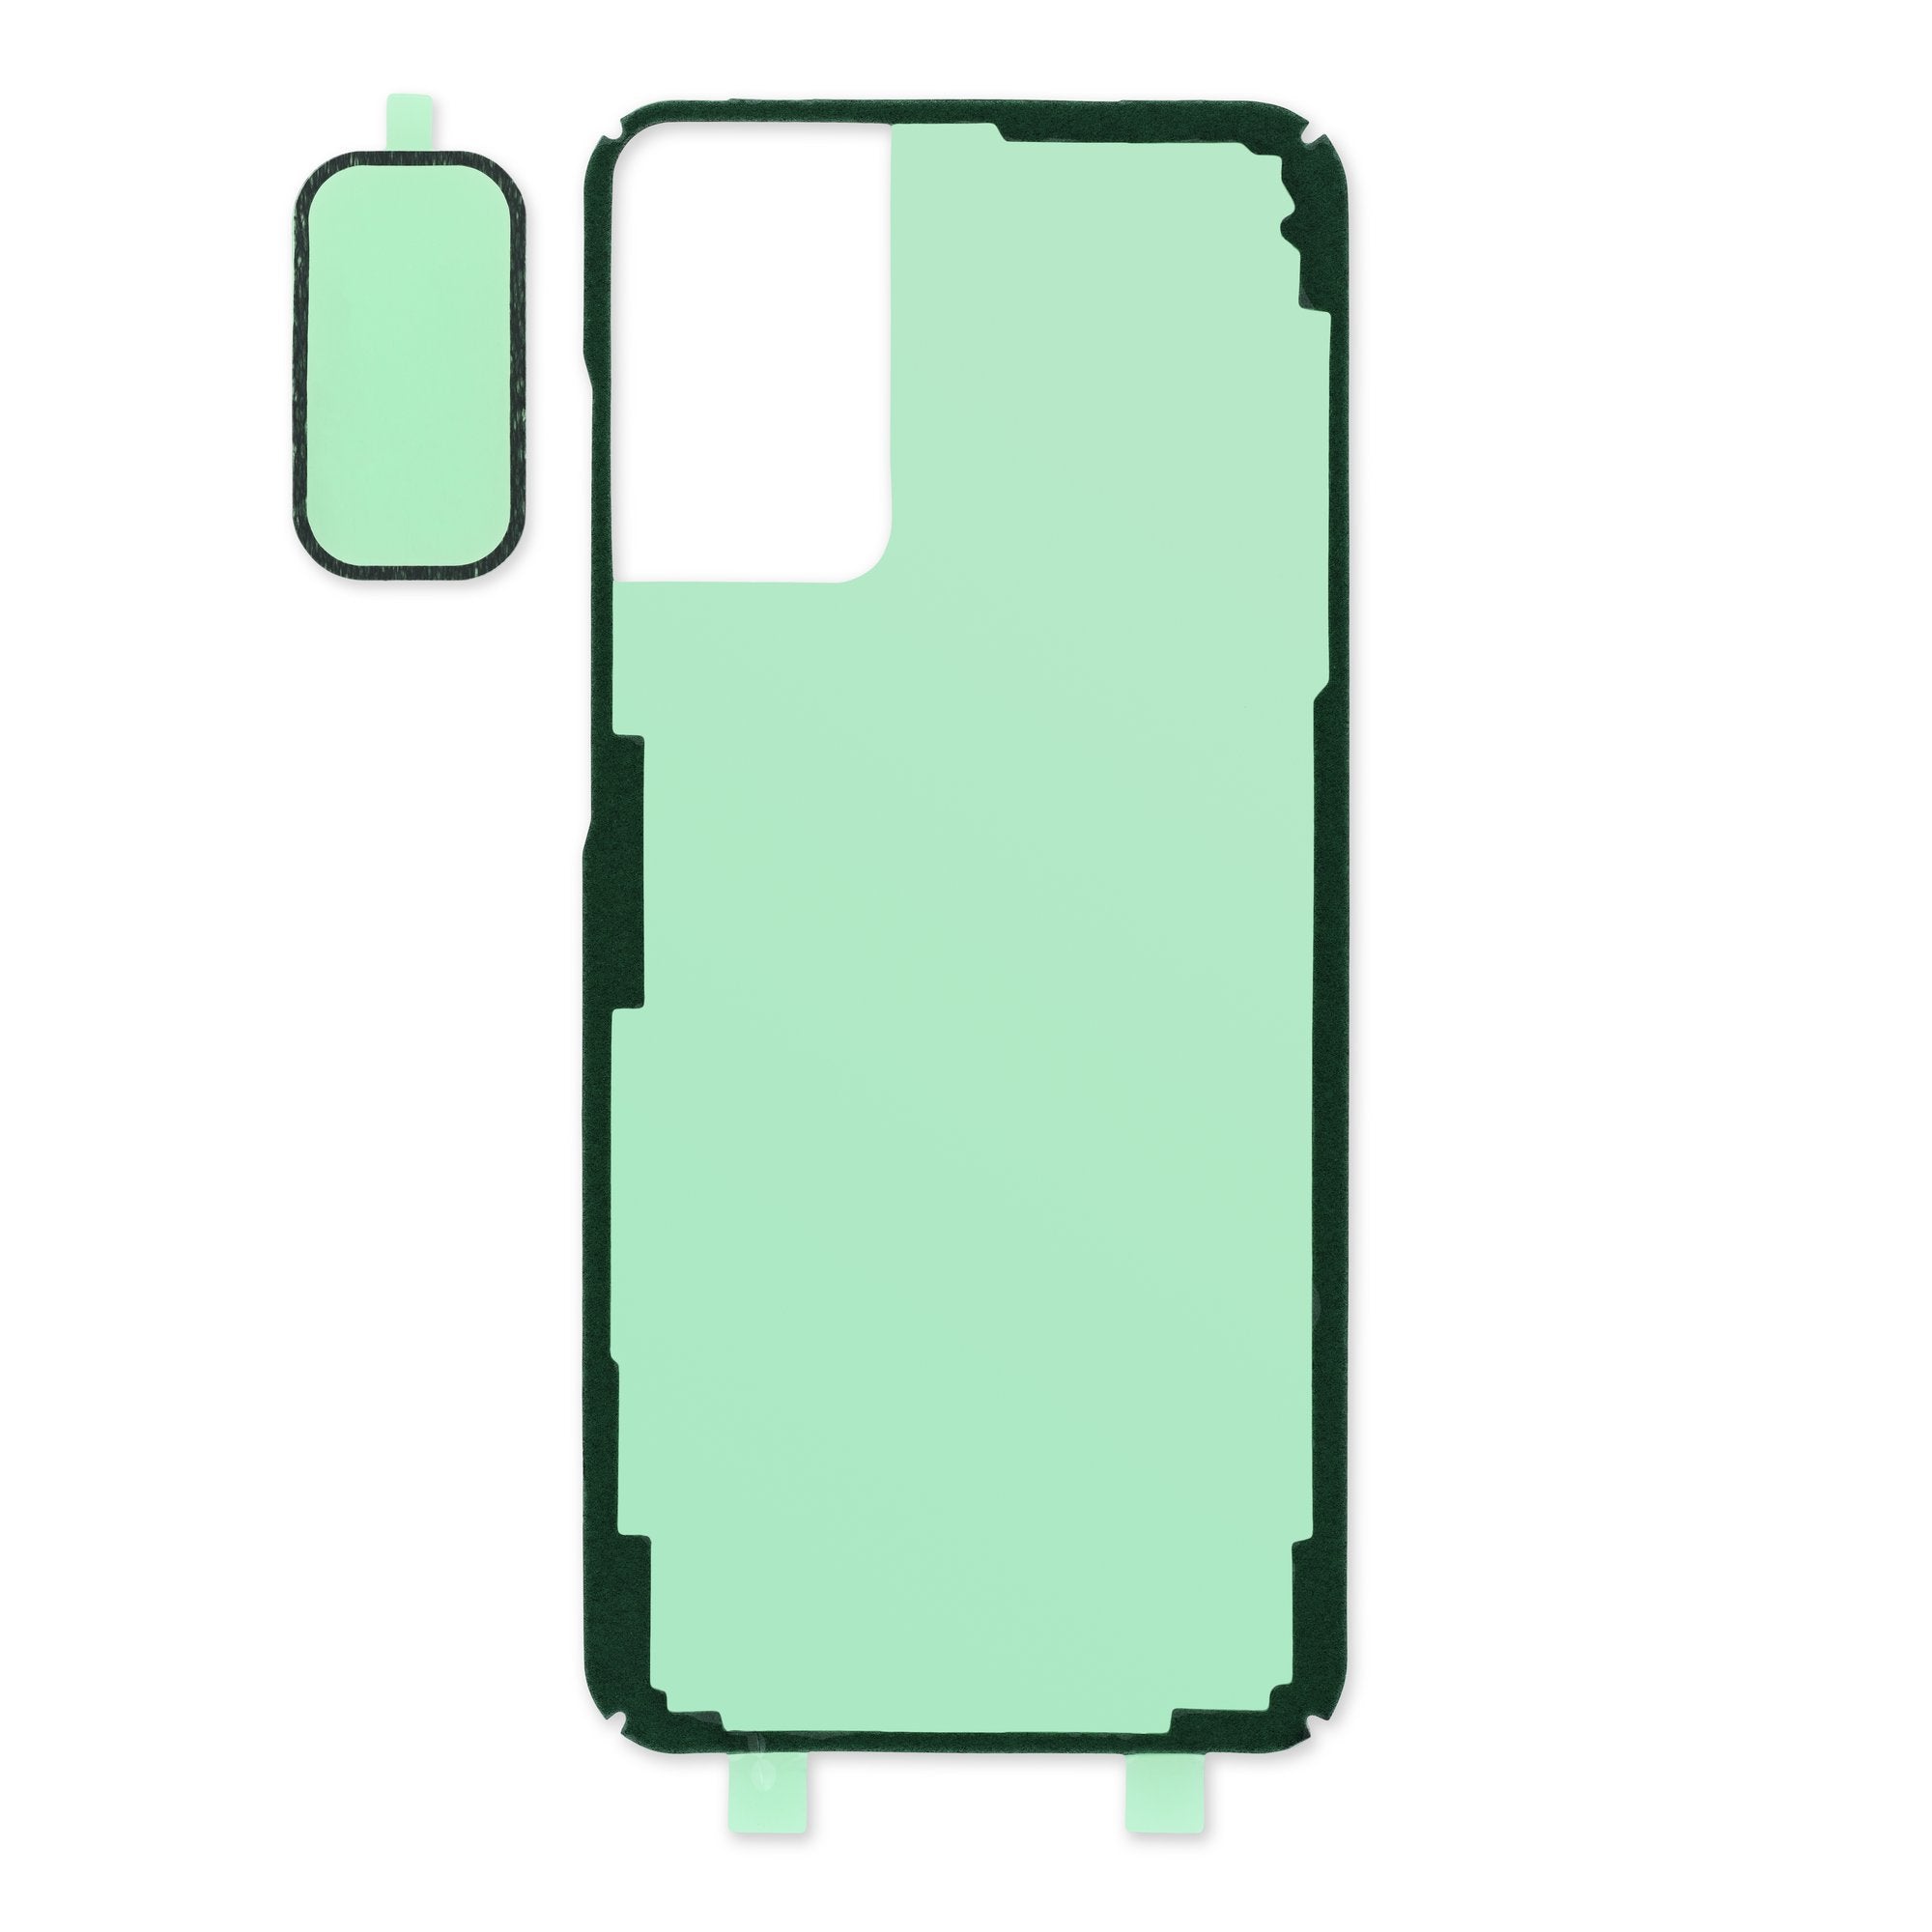 Galaxy S20 Rear Cover Adhesive New